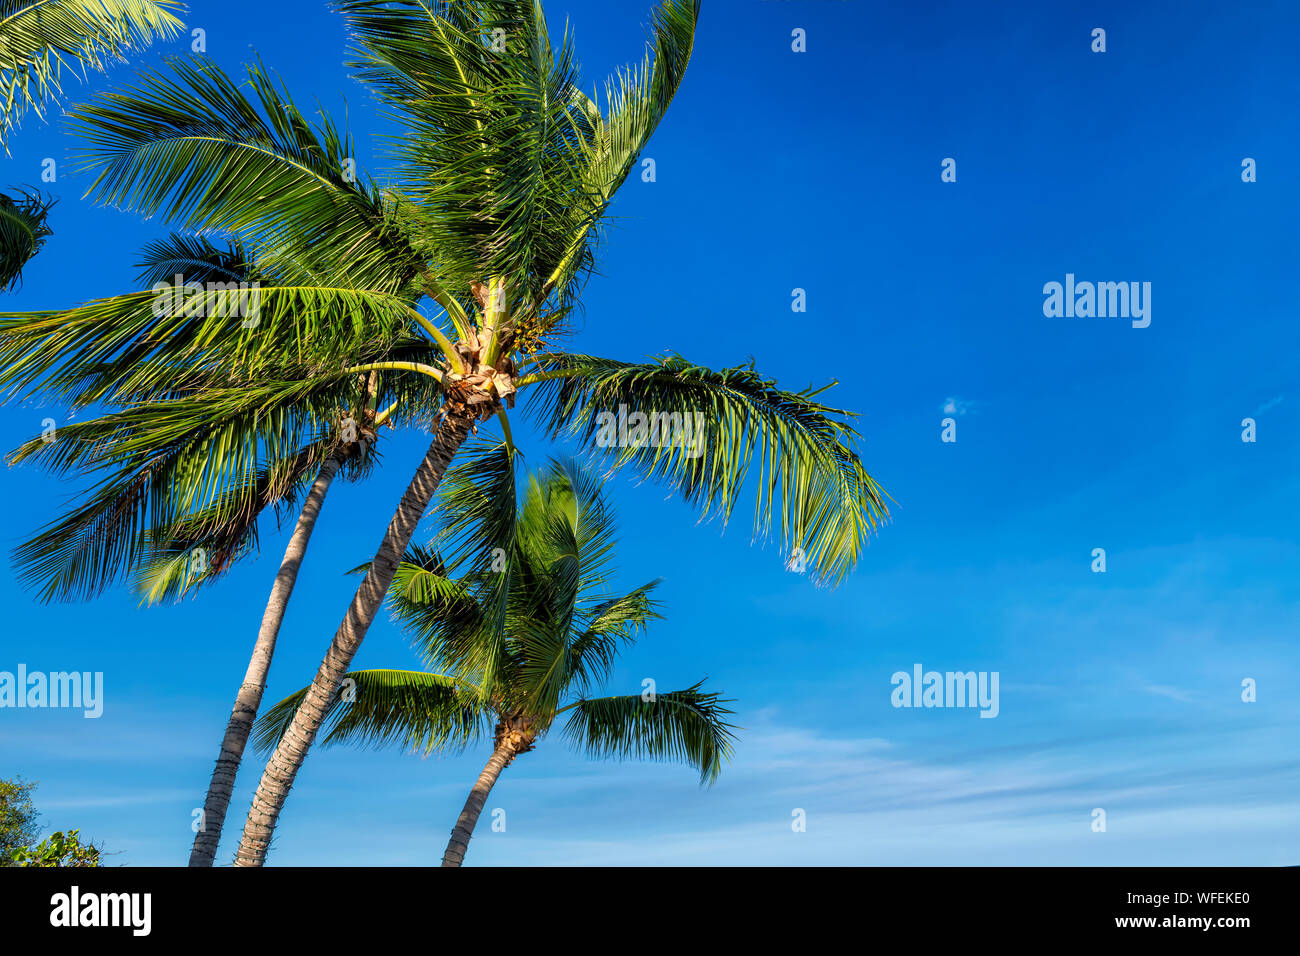 Coconut palm trees at sunset Stock Photo